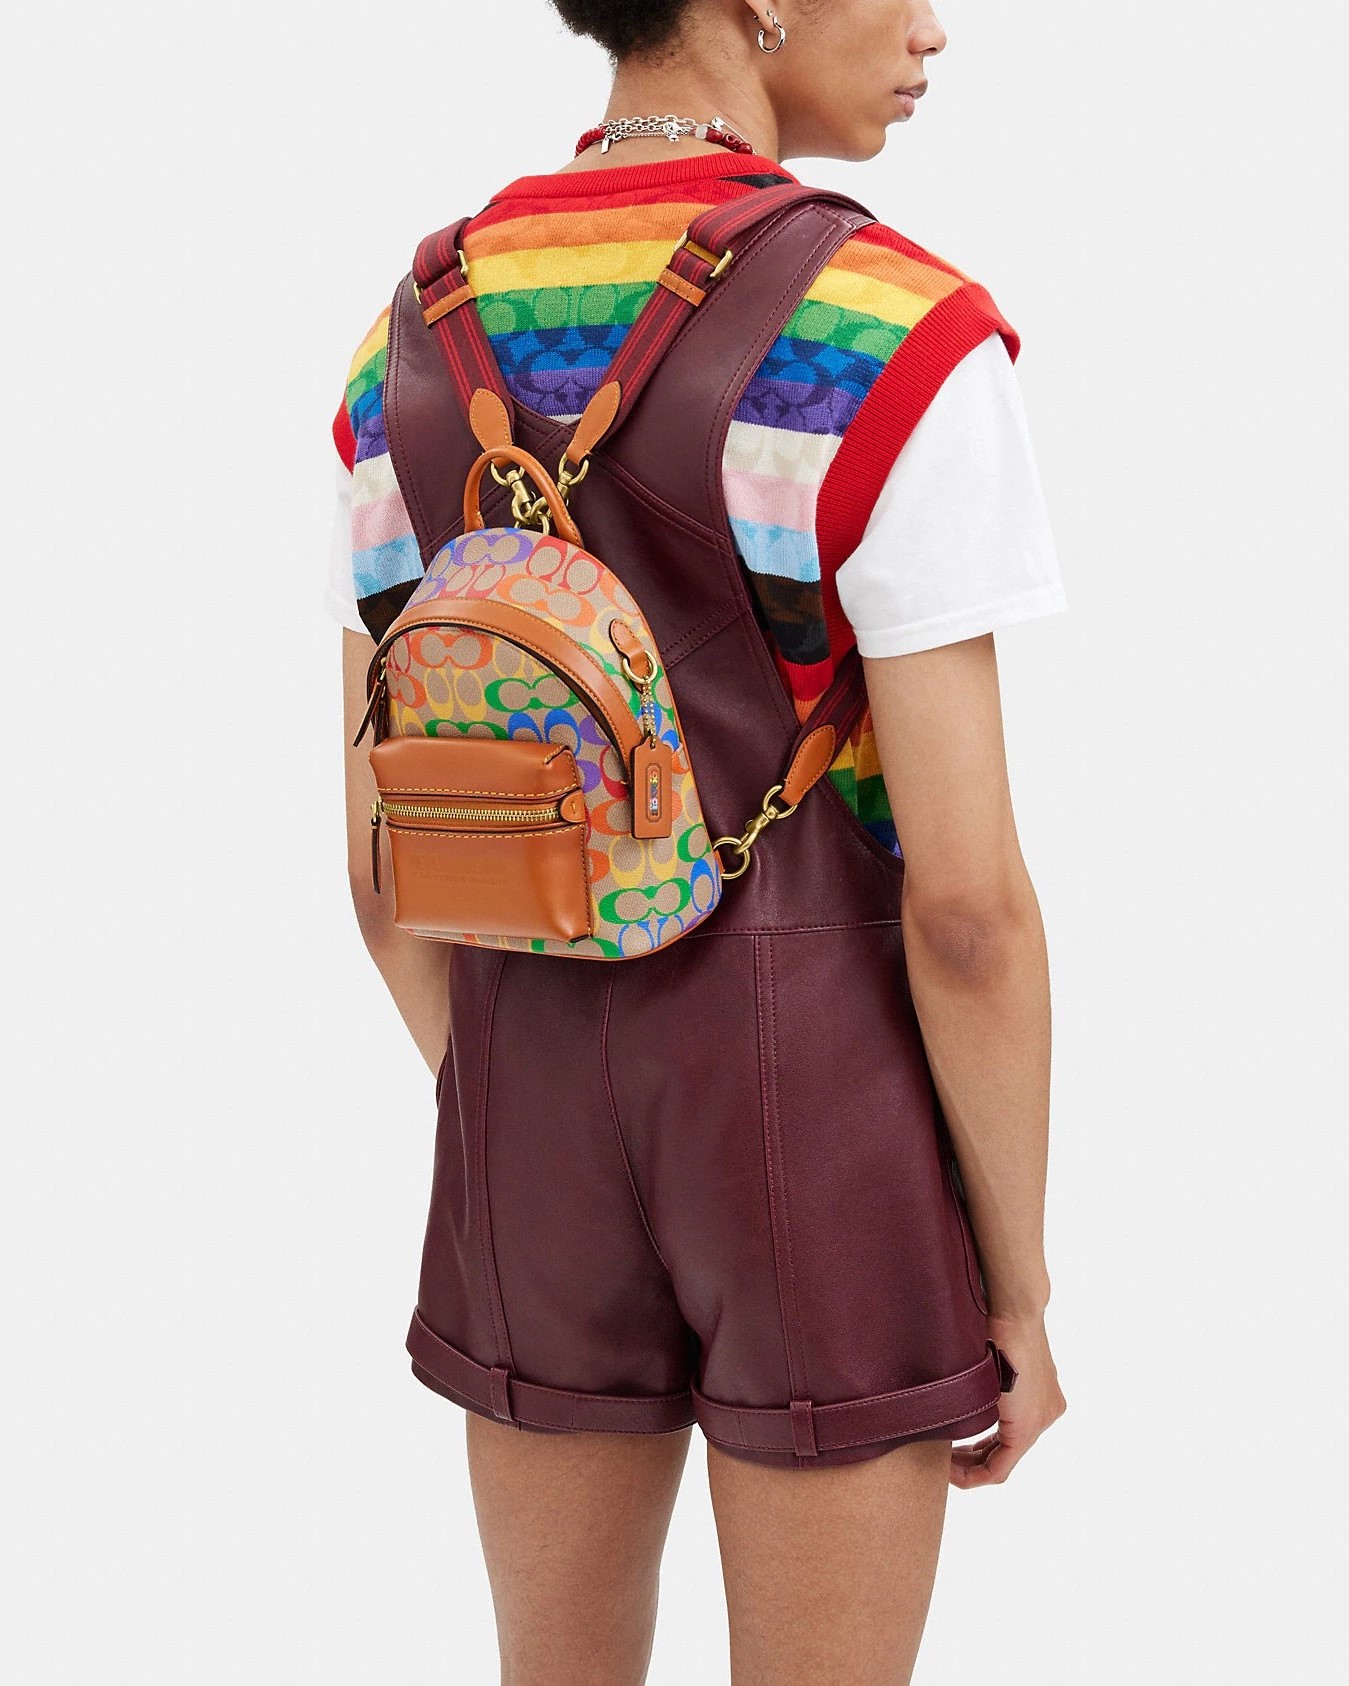 BALO NỮ COACH CẦU VỒNG CHARTER BACKPACK 18 IN RAINBOW SIGNATURE CANVAS CJ878 1